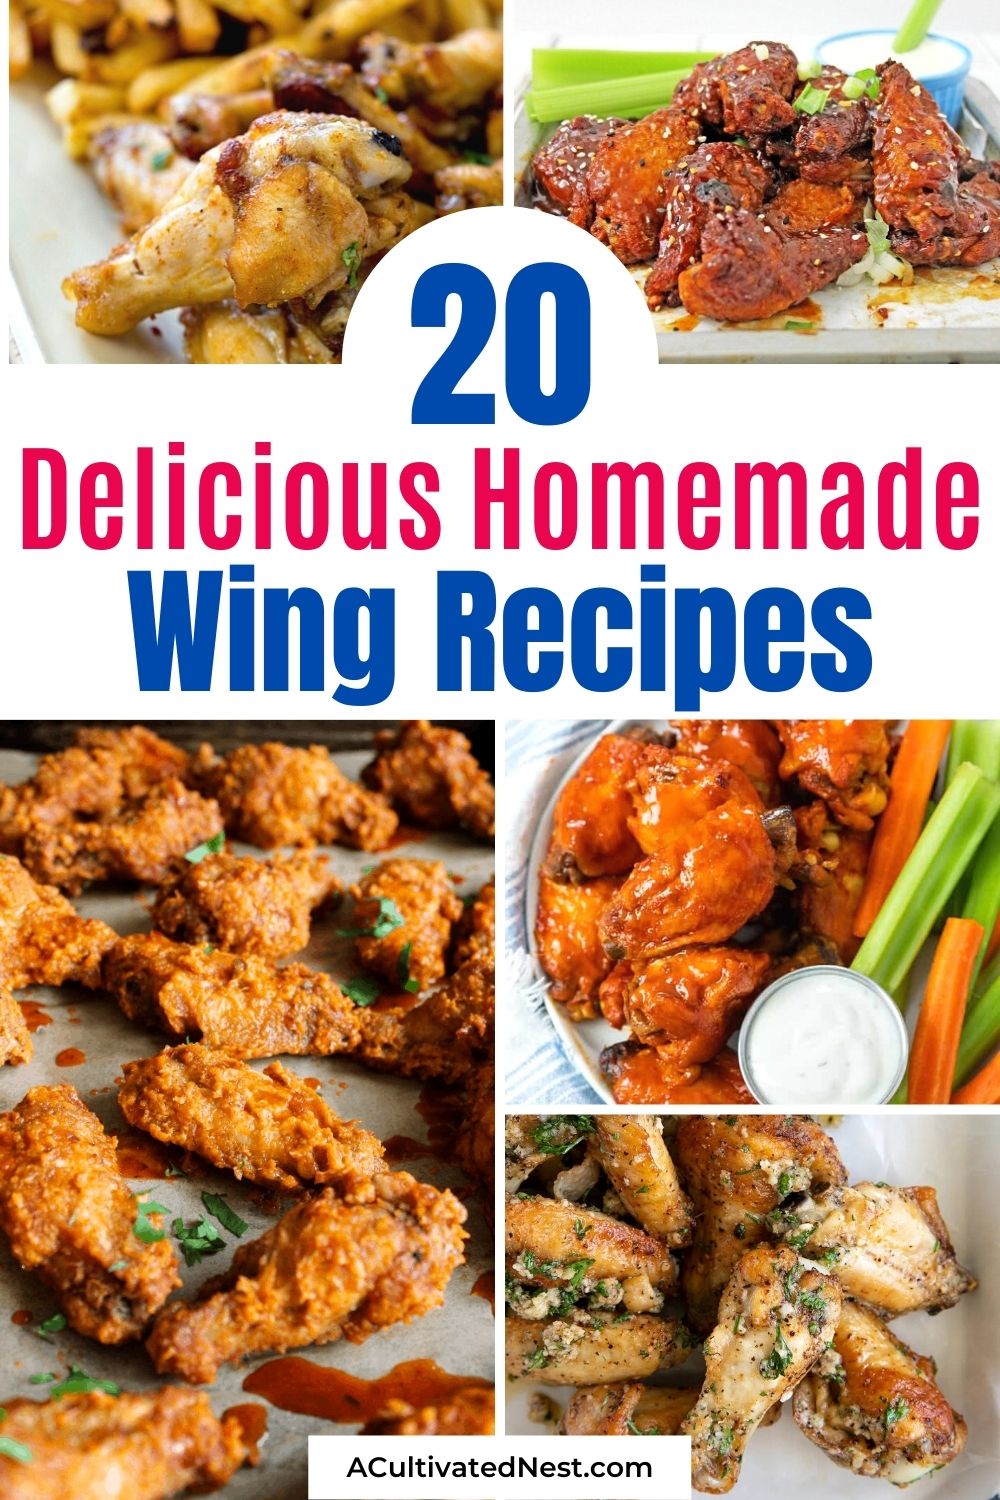 20 Tasty Wing Recipes for Your Next Watch Party- If you need a tasty recipe for a sports watch party or your family's dinner, these delicious wing recipes are sure to be a hit! | #recipes #wingRecipes #chickenRecipes #watchPartyRecipes #ACultivatedNest